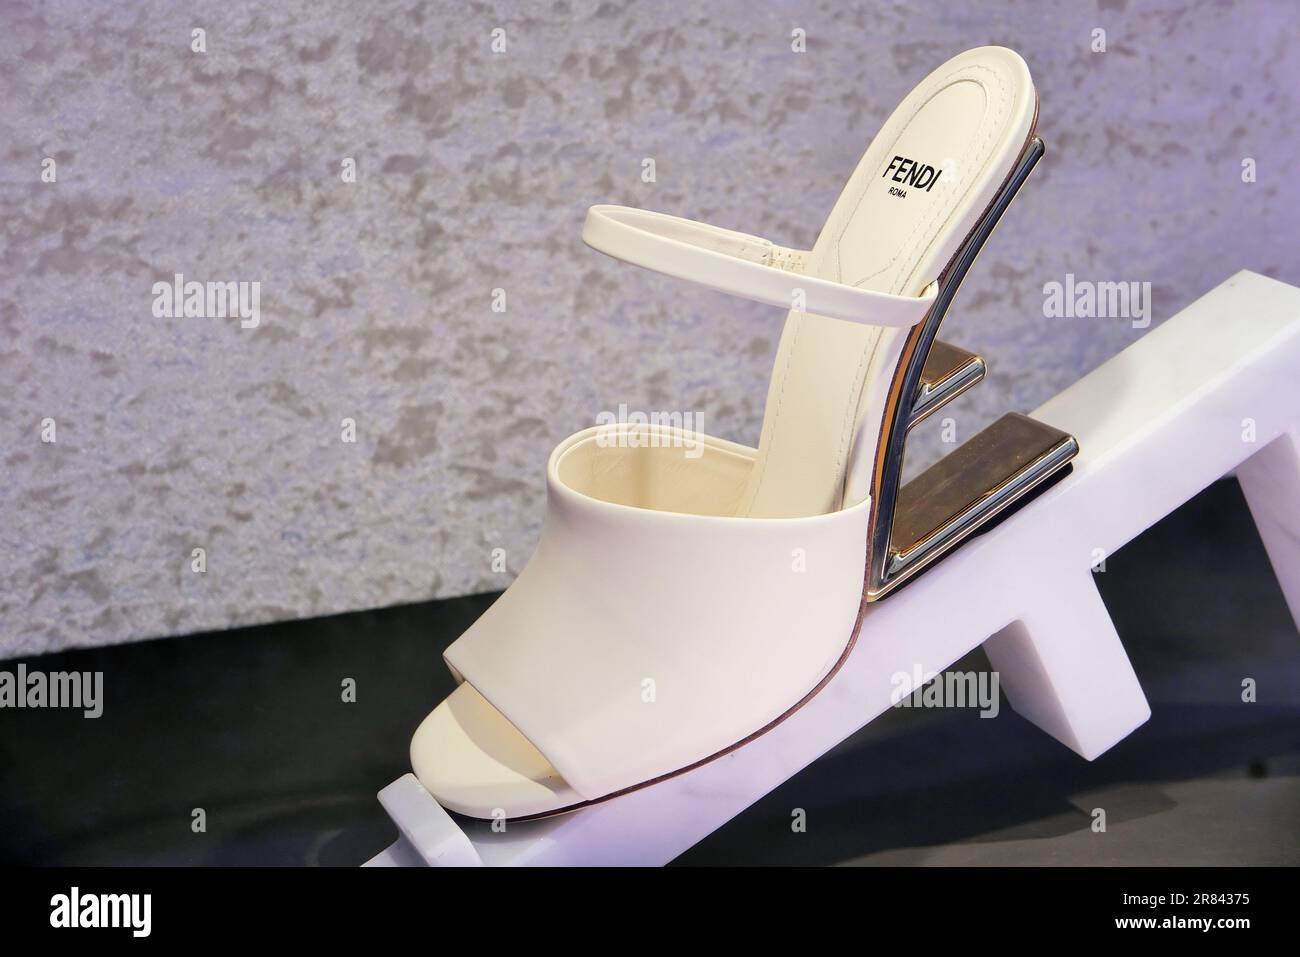 FENDI WOMEN'S SHOES ON DISPLAY INSIDE THE FASHION BOUTIQUE Stock Photo -  Alamy